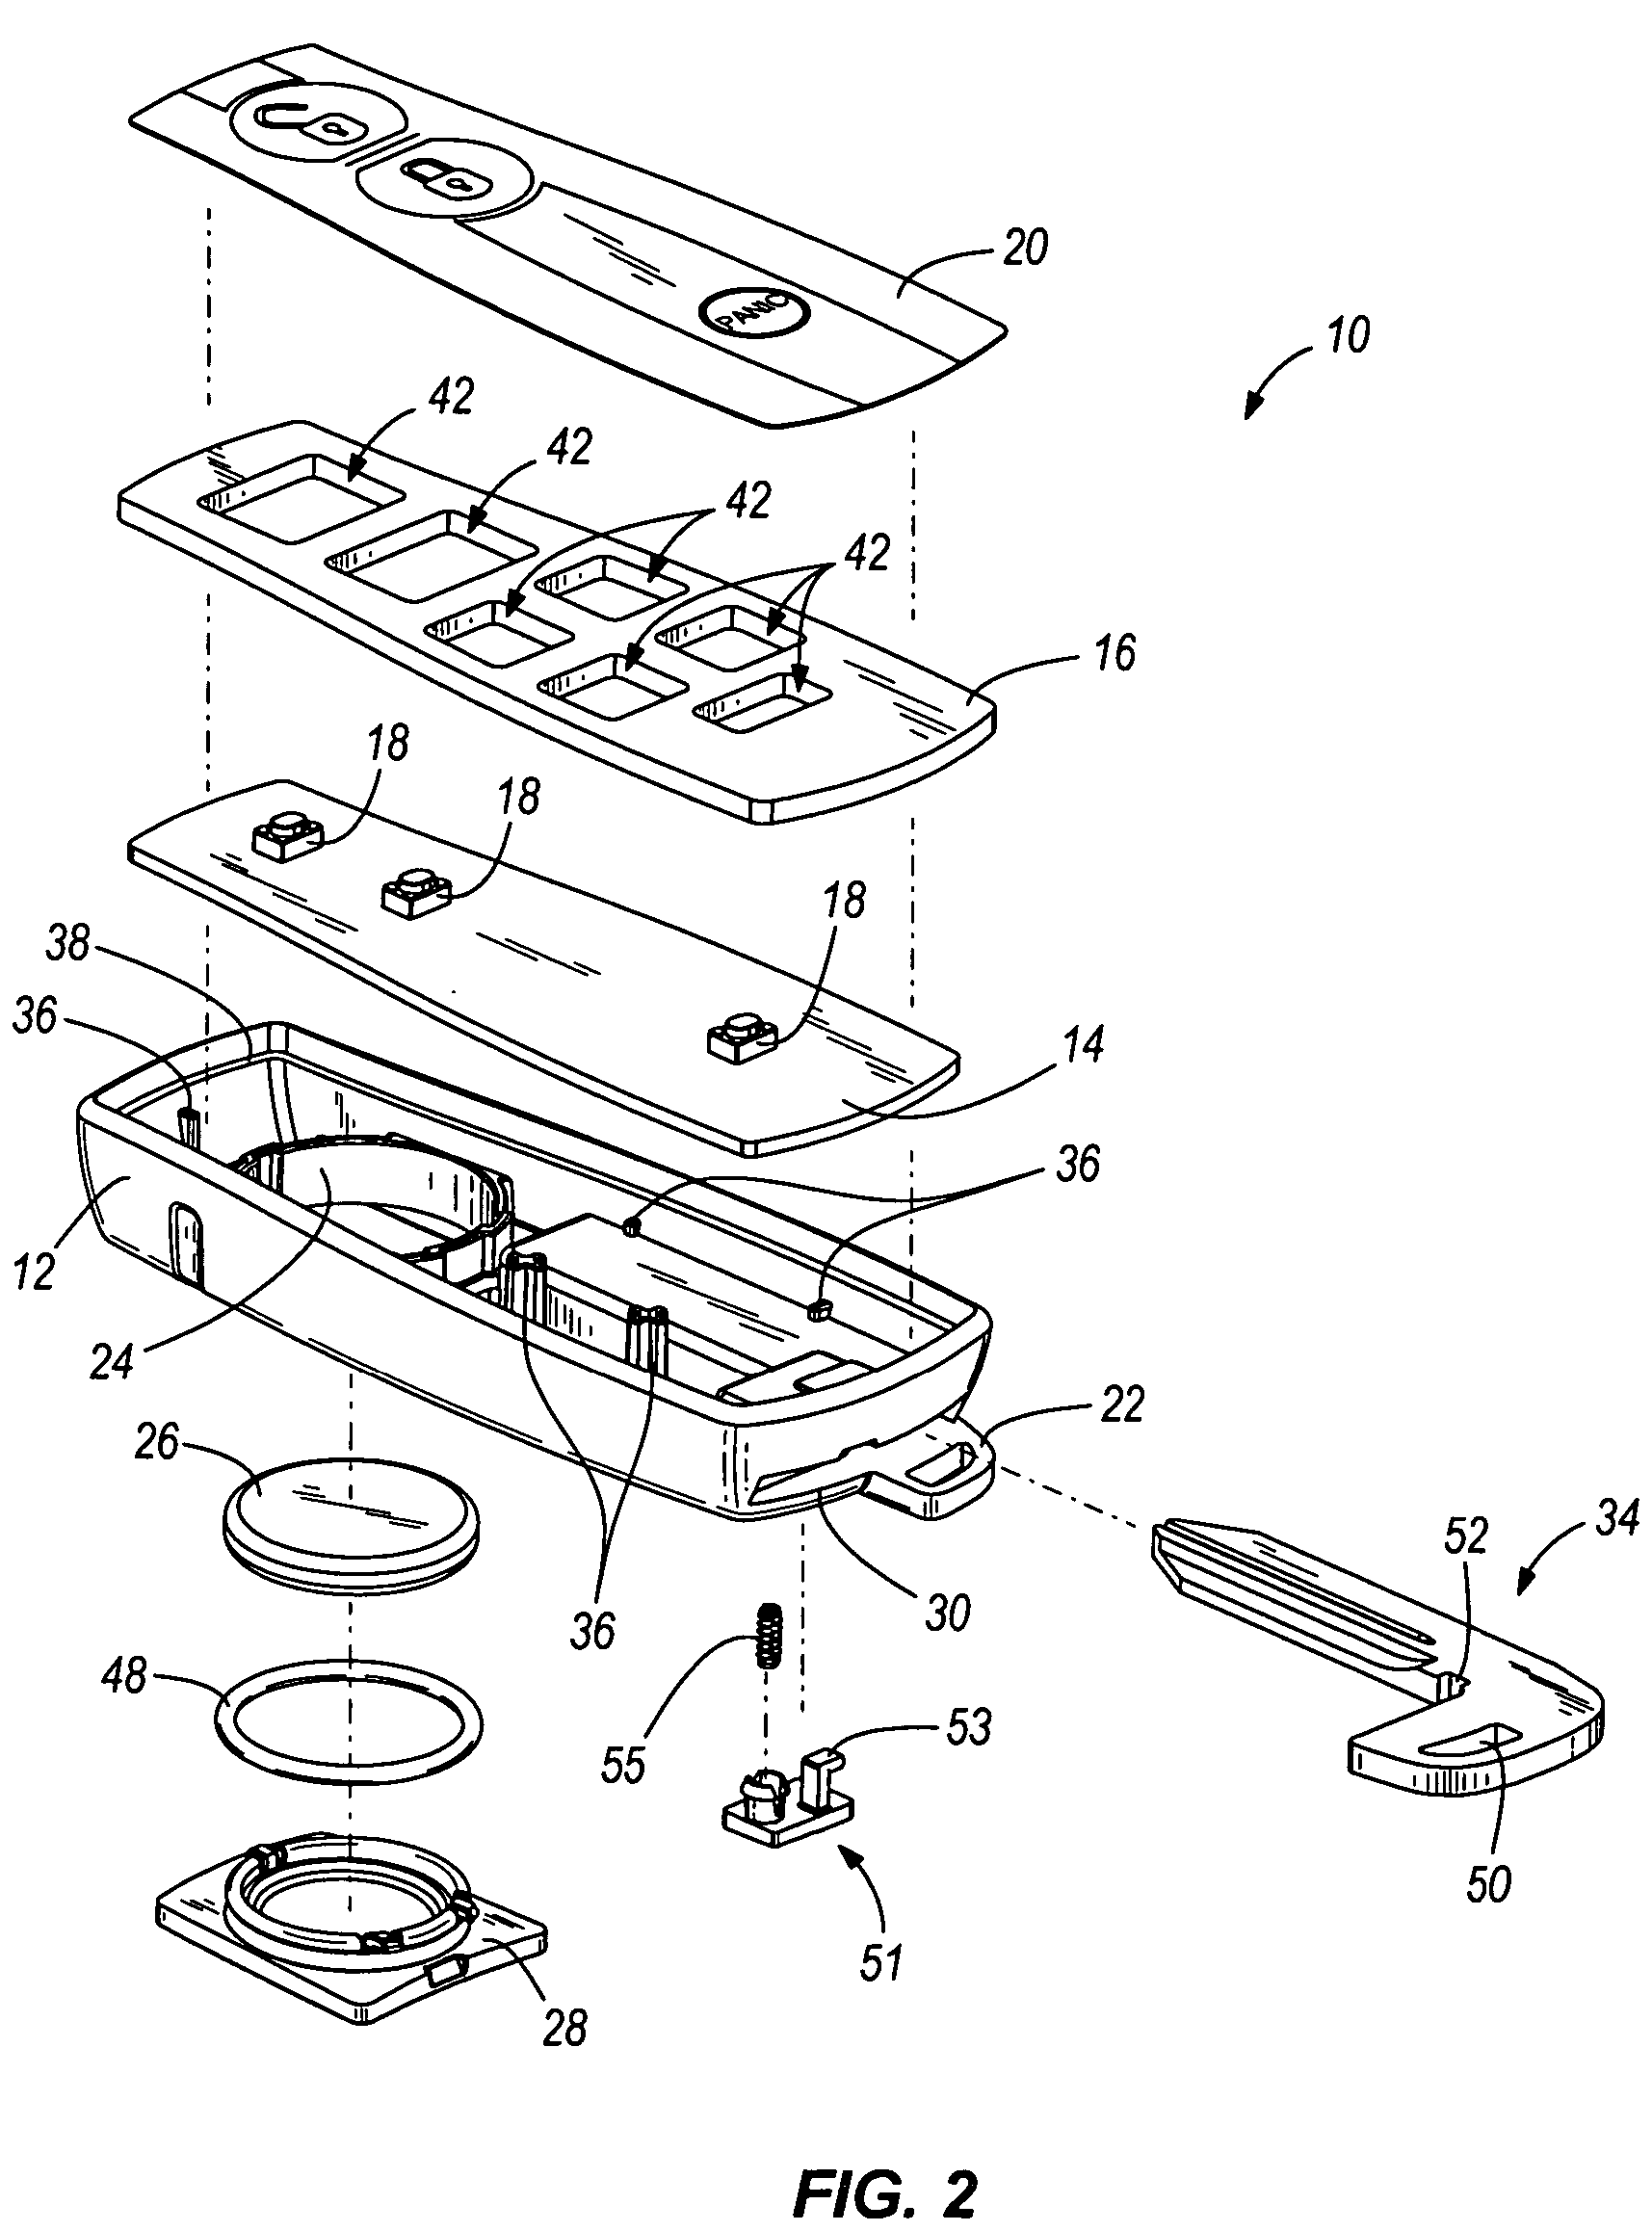 Key fob device and method